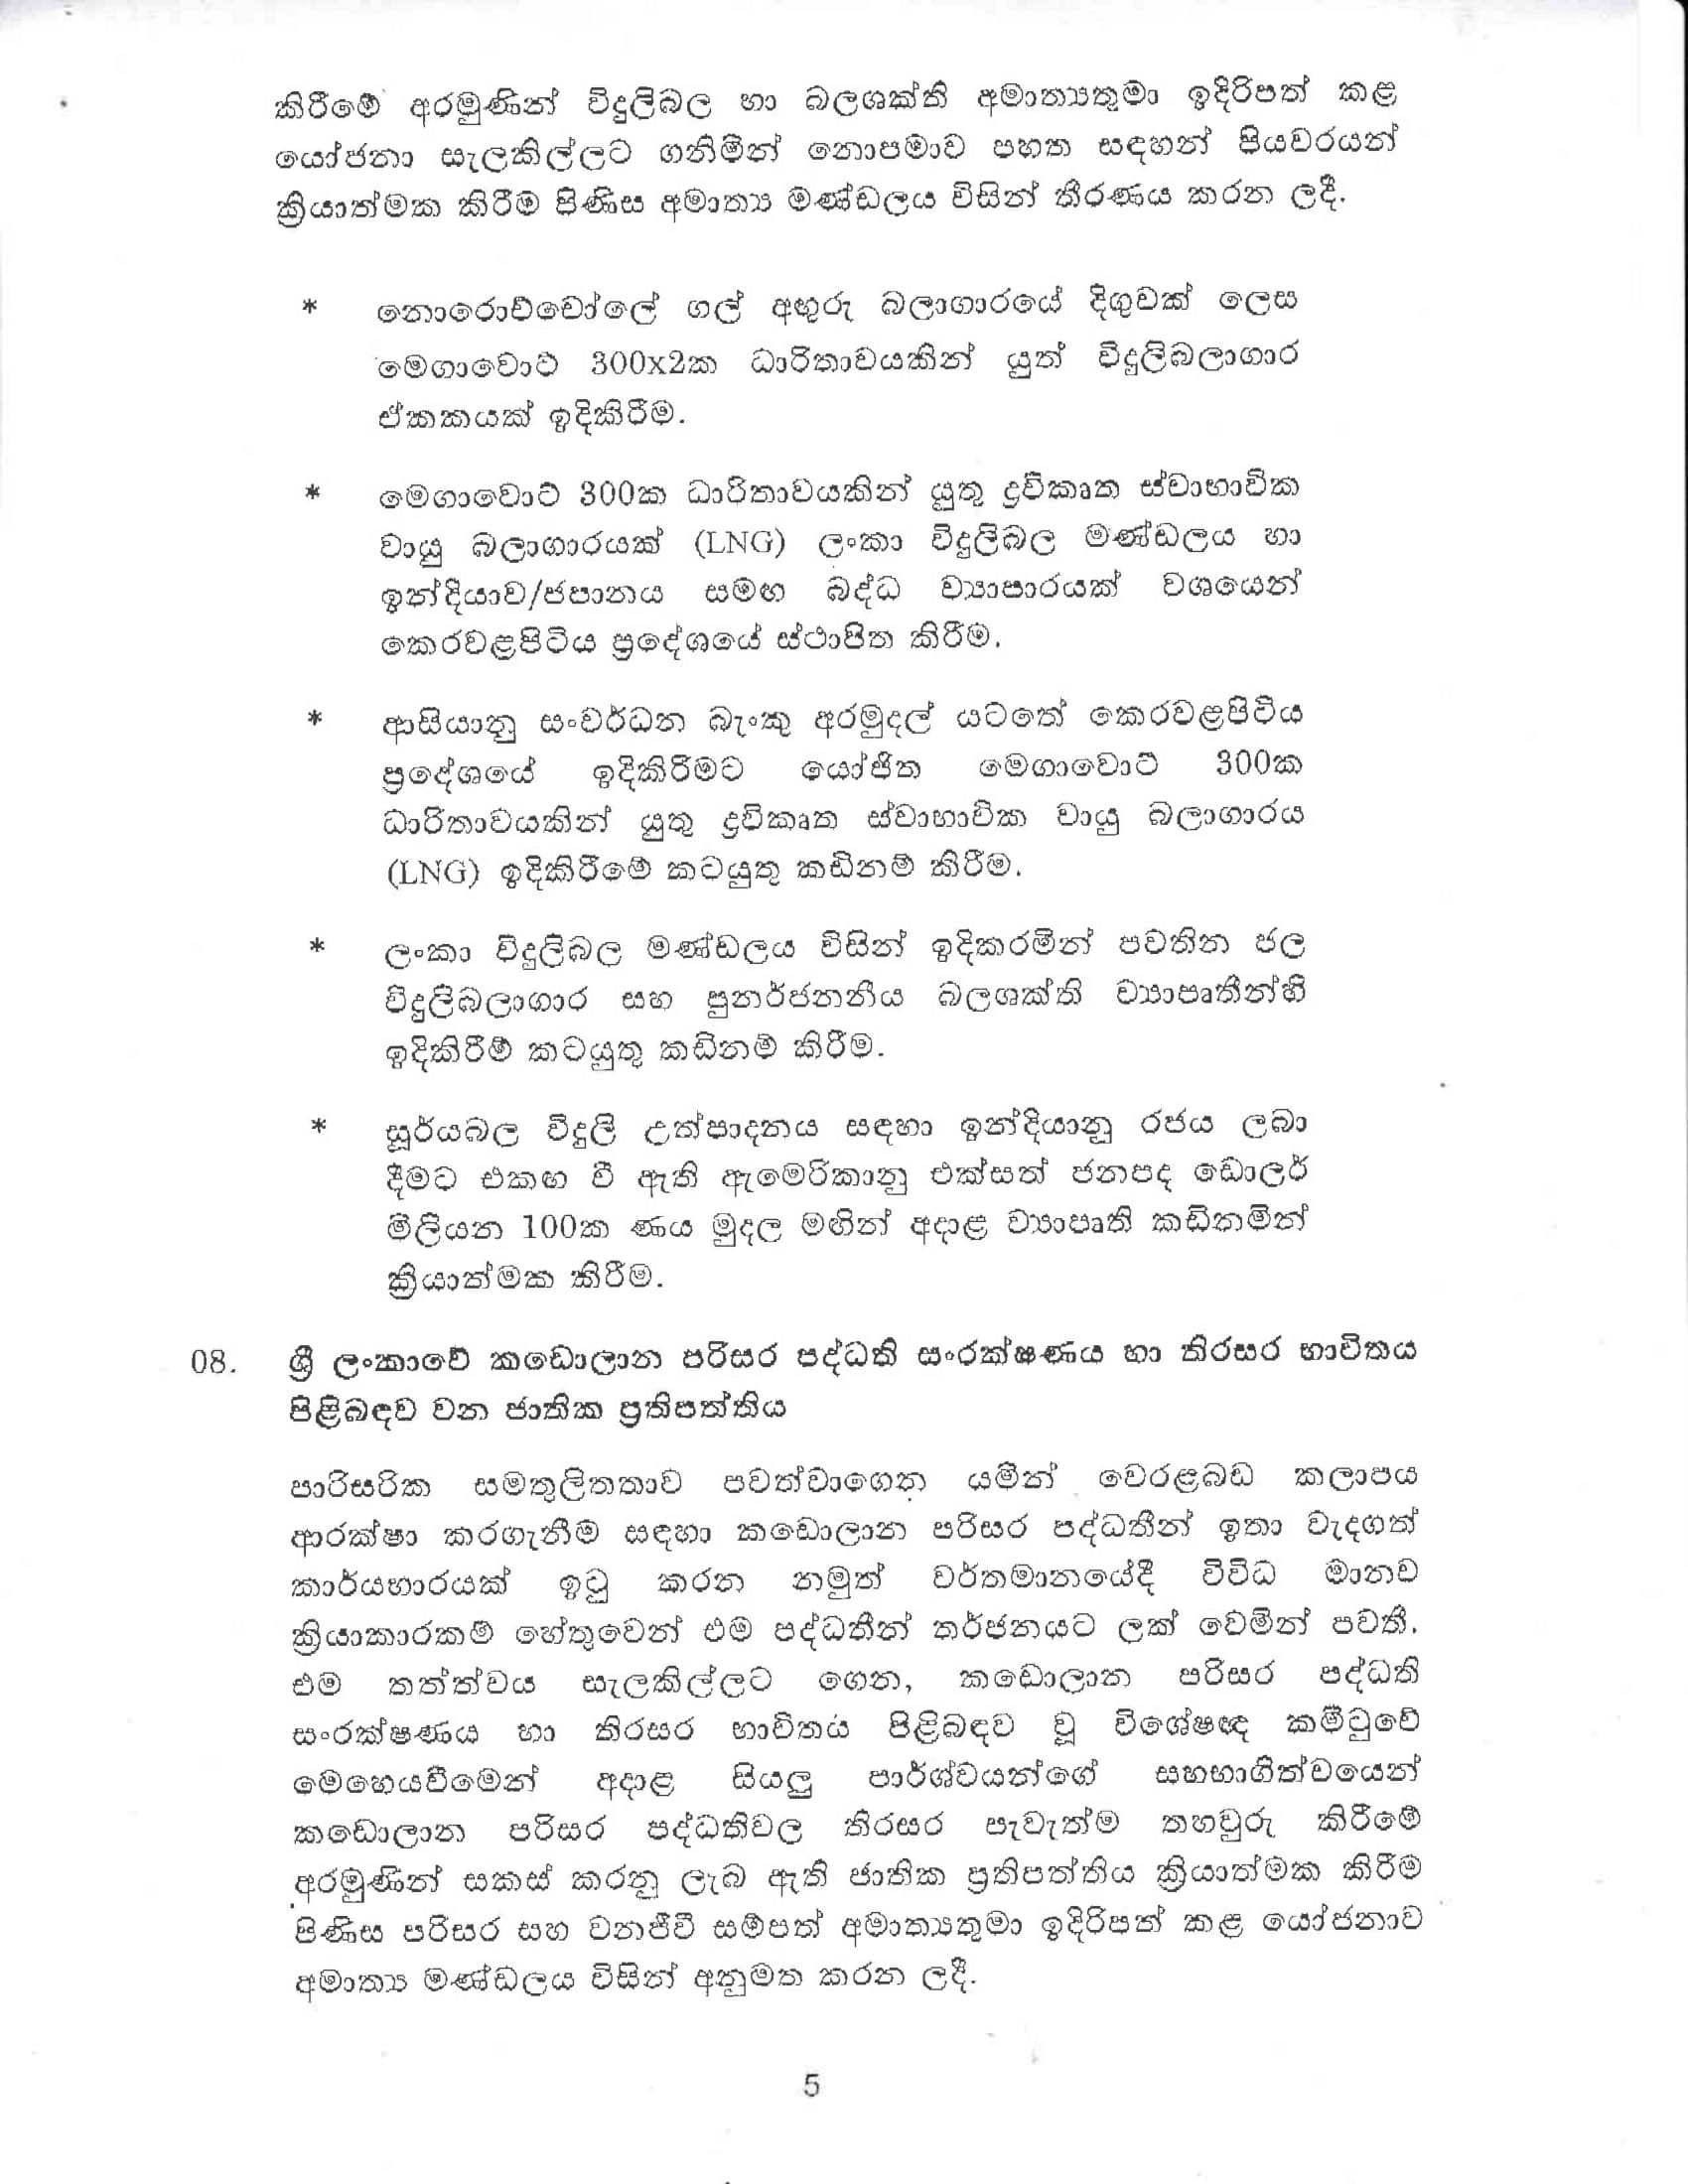 Cabinet Decision on 22.01.2020Full document 5